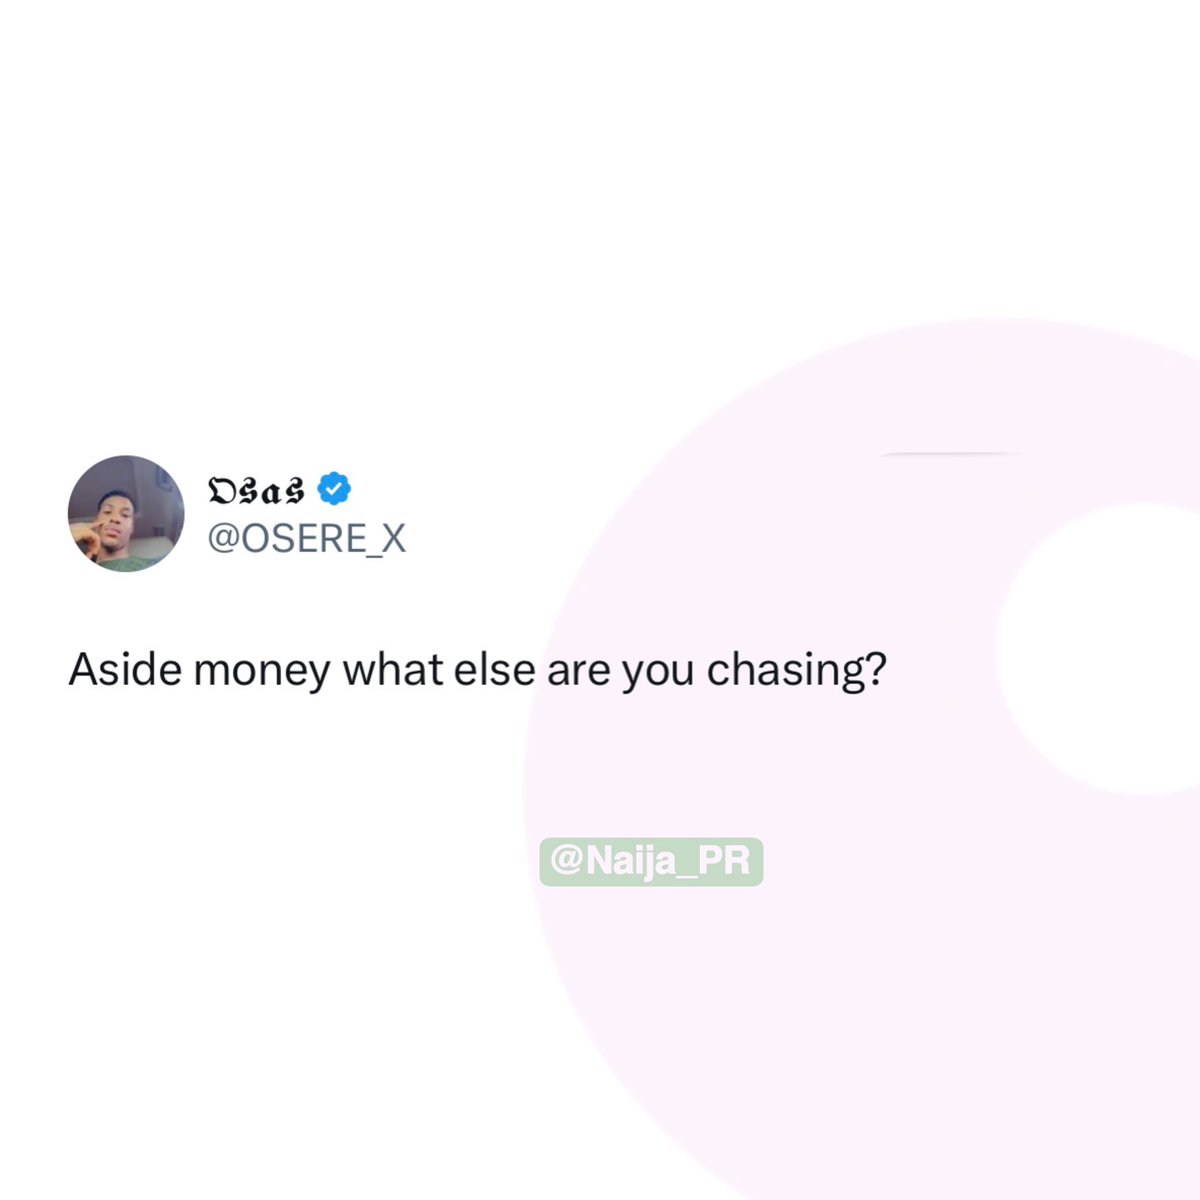 What else are you chasing?